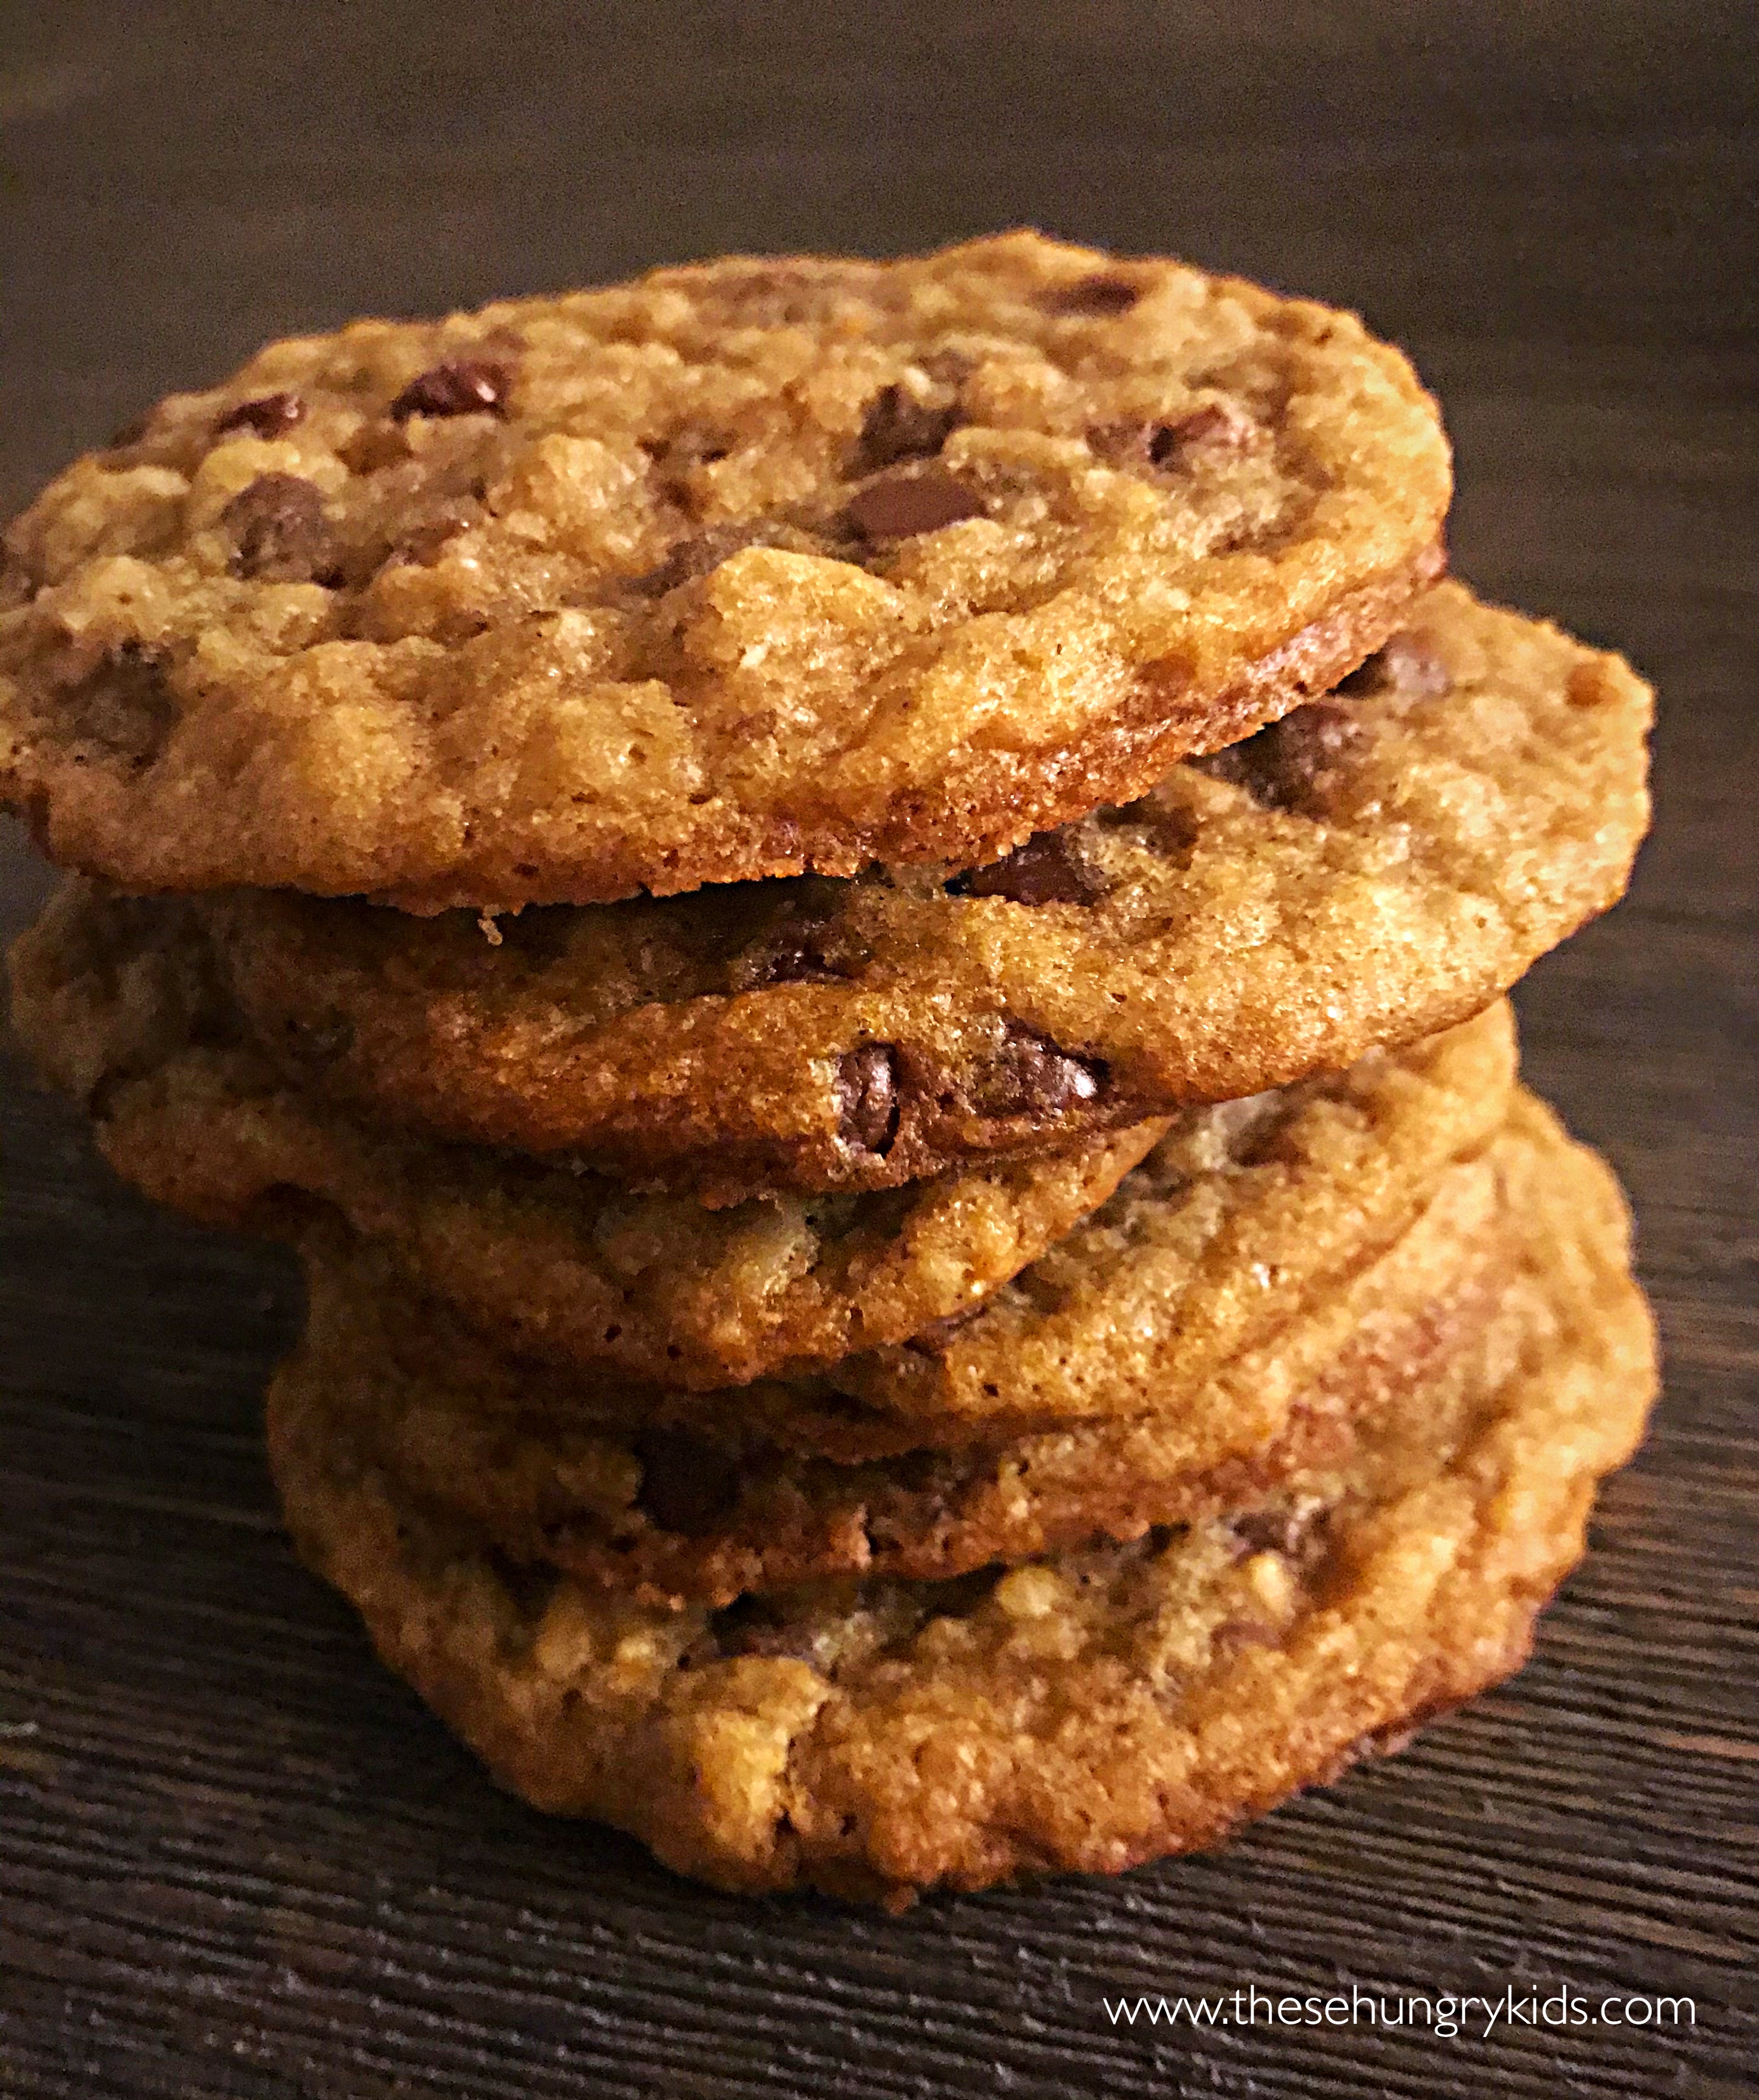 Oatmeal chocolate chip cookies from thesehungrykids.com